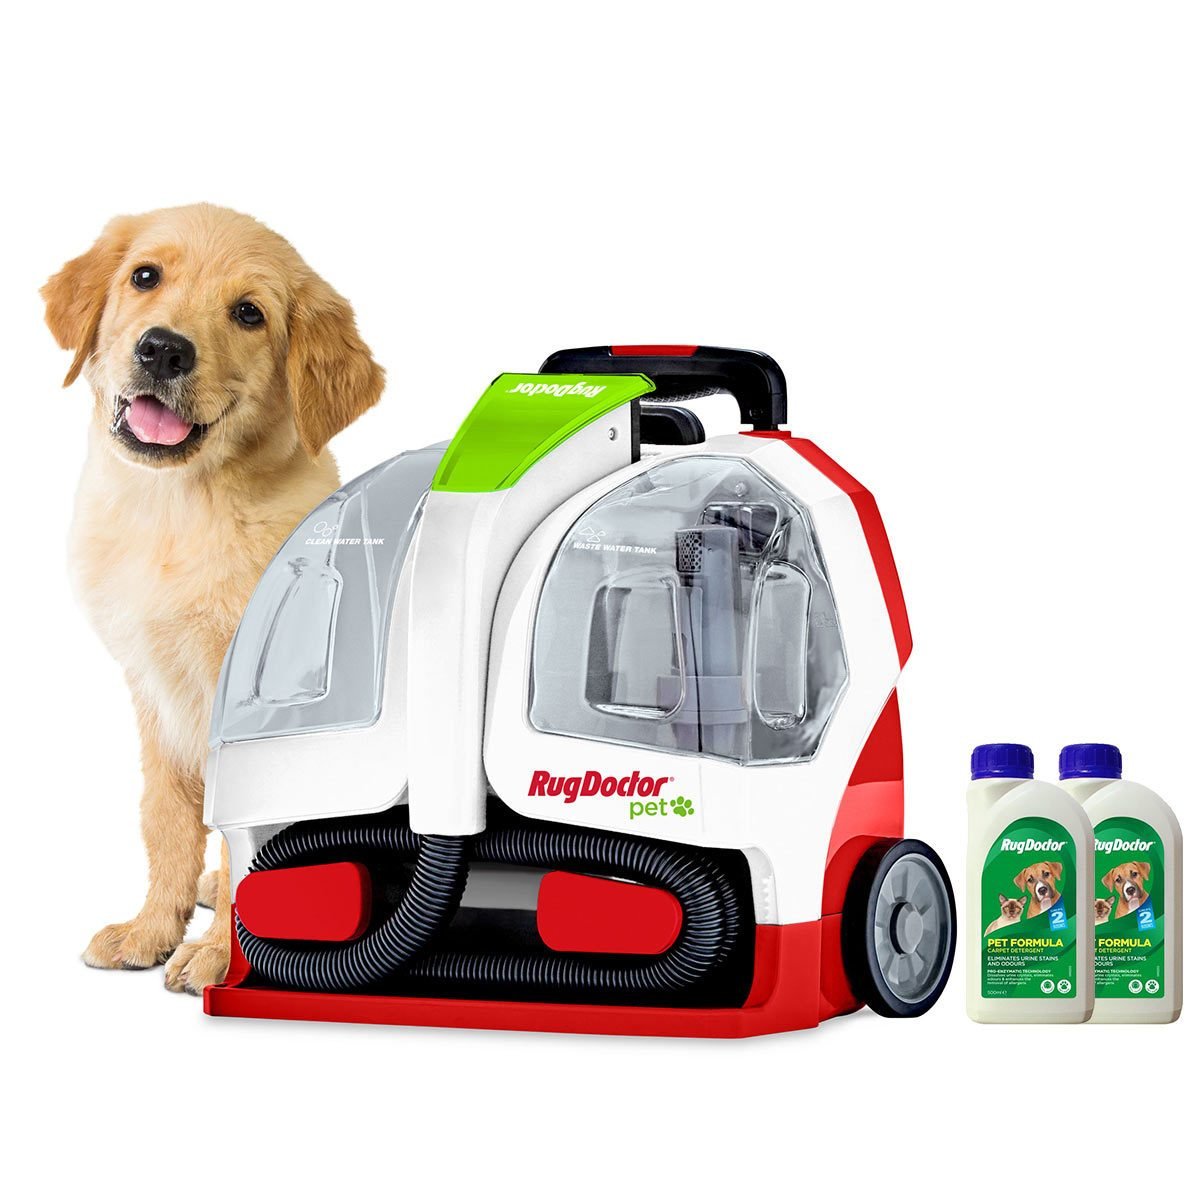 Rug Doctor Pet Portable Spot Cleaner with 2 x 500ml Pet Formula Cleaner - Signature Retail Stores